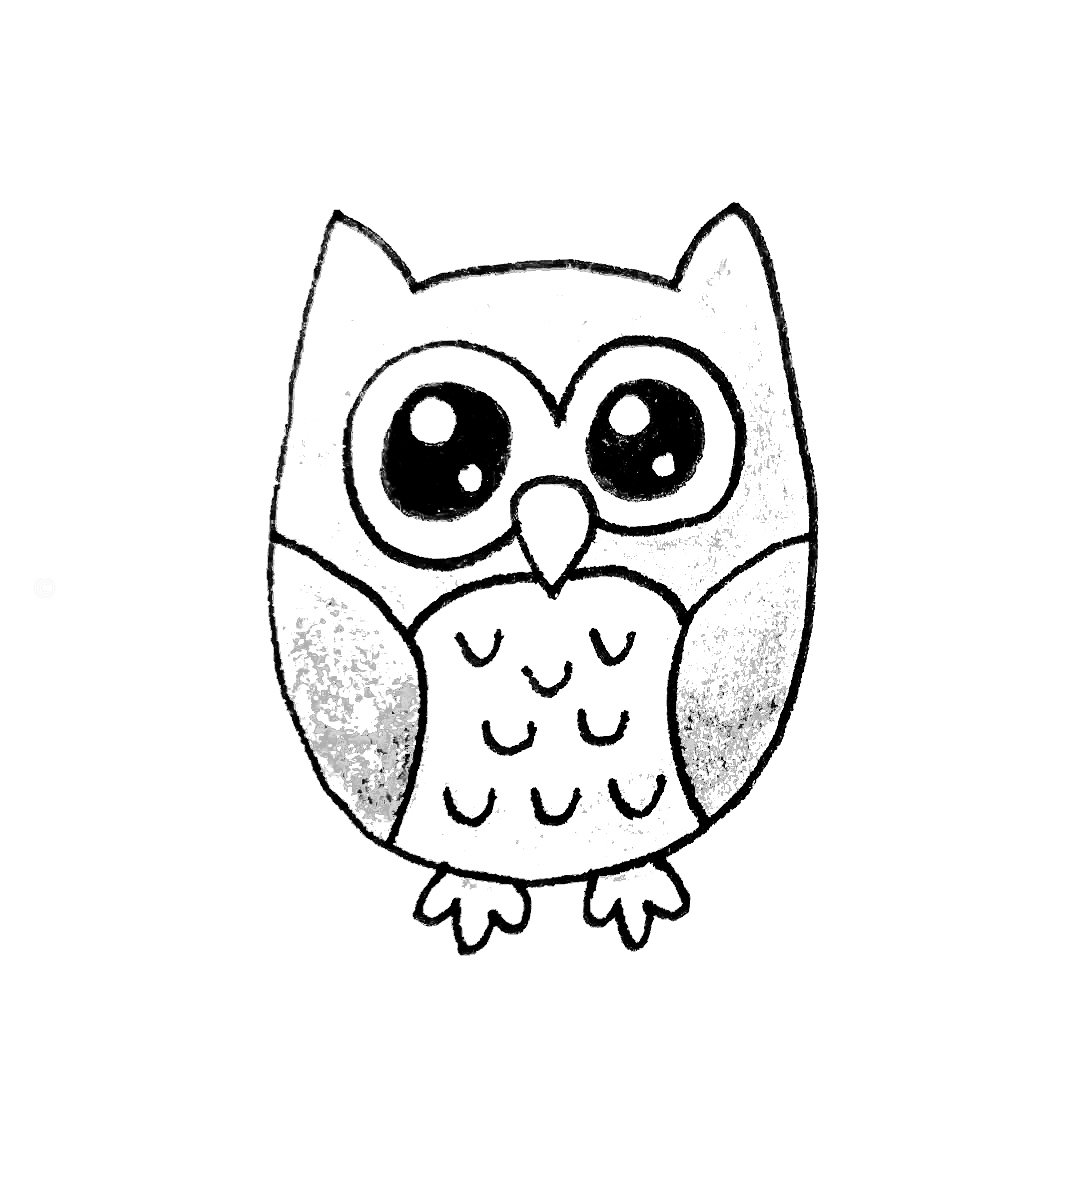 How to Draw an Owl Easy | Squishmallows - YouTube